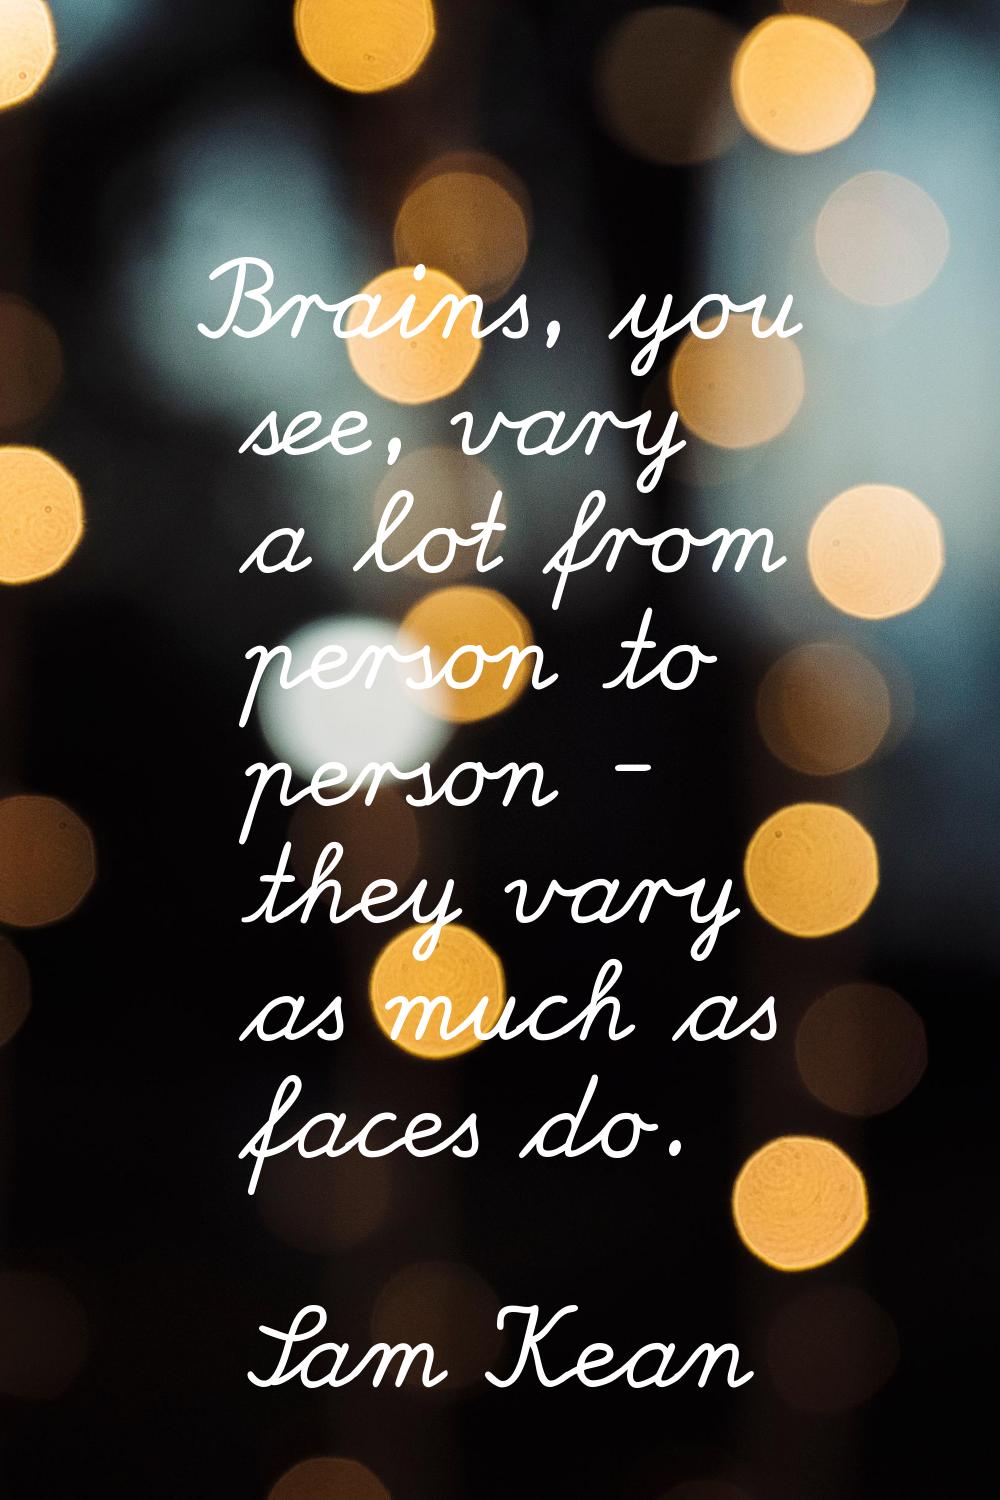 Brains, you see, vary a lot from person to person - they vary as much as faces do.